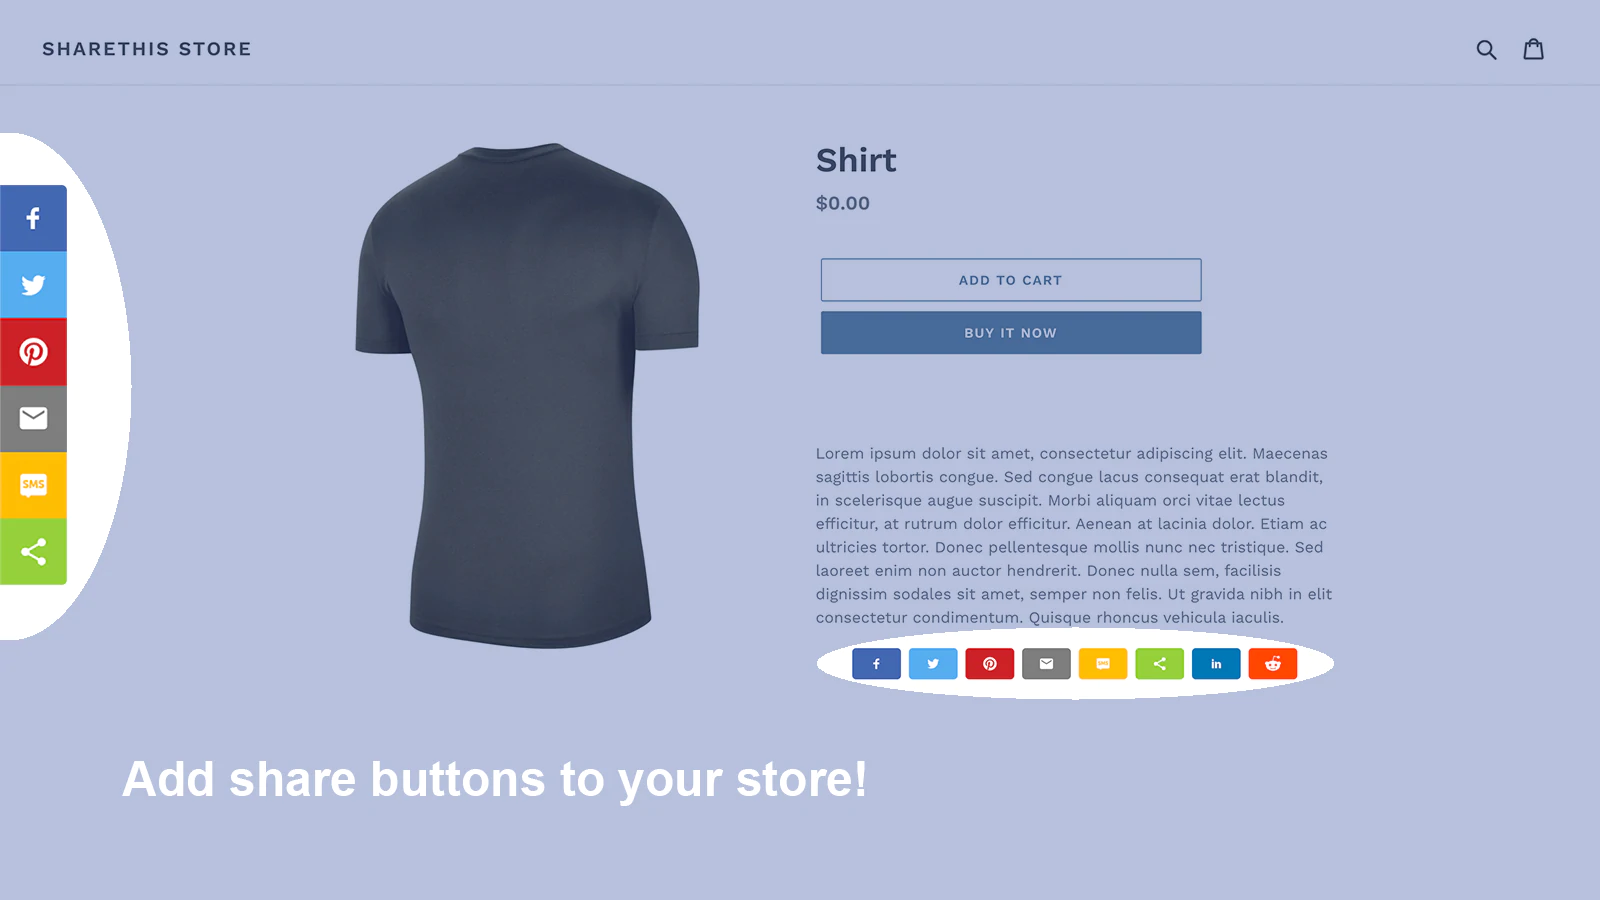 Screenshot of what the ShareThis tool looks like in practice on an online store that sells tshirts